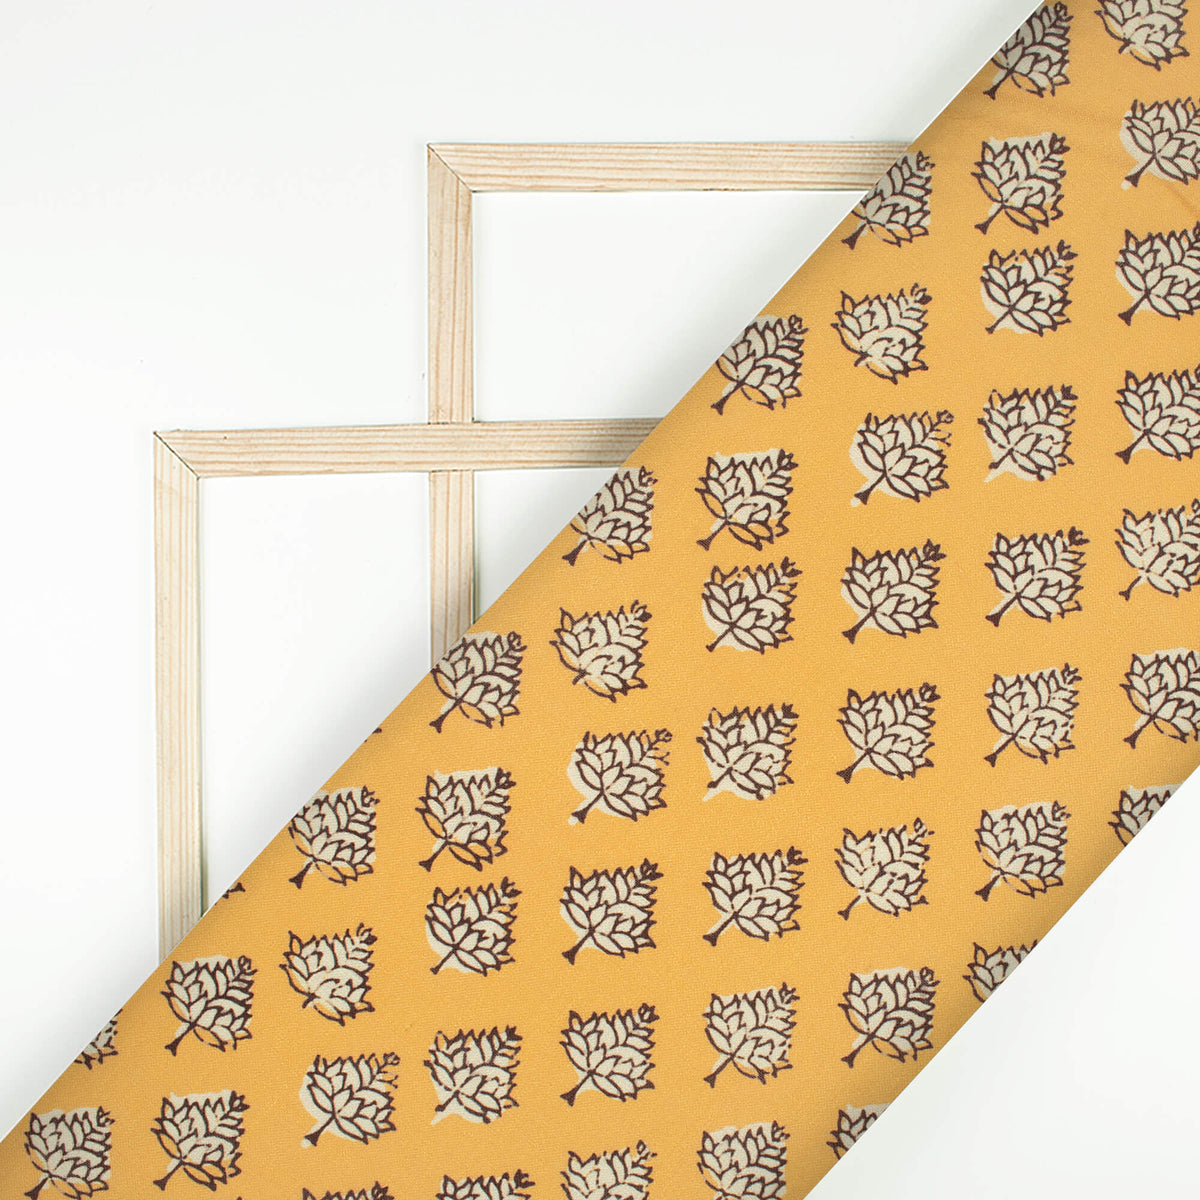 Honey Yellow And Black Floral Pattern Digital Print Linen Textured Fabric (Width 56 Inches)